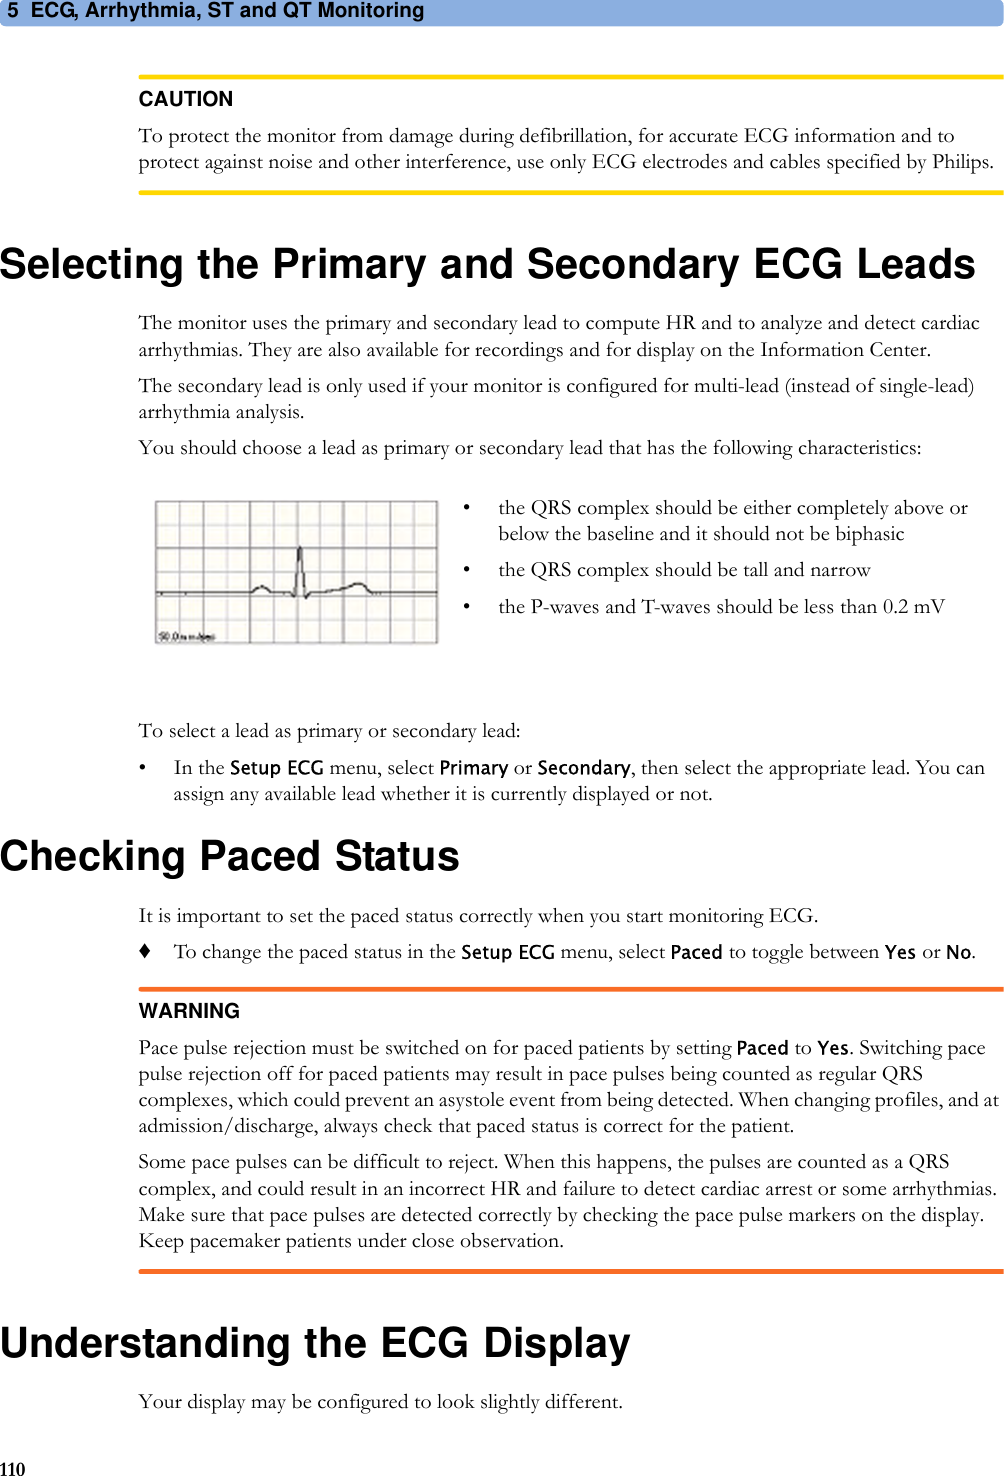 5 ECG, Arrhythmia, ST and QT Monitoring110CAUTIONTo protect the monitor from damage during defibrillation, for accurate ECG information and to protect against noise and other interference, use only ECG electrodes and cables specified by Philips.Selecting the Primary and Secondary ECG LeadsThe monitor uses the primary and secondary lead to compute HR and to analyze and detect cardiac arrhythmias. They are also available for recordings and for display on the Information Center.The secondary lead is only used if your monitor is configured for multi-lead (instead of single-lead) arrhythmia analysis.You should choose a lead as primary or secondary lead that has the following characteristics:To select a lead as primary or secondary lead:•In the Setup ECG menu, select Primary or Secondary, then select the appropriate lead. You can assign any available lead whether it is currently displayed or not.Checking Paced StatusIt is important to set the paced status correctly when you start monitoring ECG.♦To change the paced status in the Setup ECG menu, select Paced to toggle between Yes or No.WARNINGPace pulse rejection must be switched on for paced patients by setting Paced to Yes. Switching pace pulse rejection off for paced patients may result in pace pulses being counted as regular QRS complexes, which could prevent an asystole event from being detected. When changing profiles, and at admission/discharge, always check that paced status is correct for the patient.Some pace pulses can be difficult to reject. When this happens, the pulses are counted as a QRS complex, and could result in an incorrect HR and failure to detect cardiac arrest or some arrhythmias. Make sure that pace pulses are detected correctly by checking the pace pulse markers on the display. Keep pacemaker patients under close observation.Understanding the ECG DisplayYour display may be configured to look slightly different.• the QRS complex should be either completely above or below the baseline and it should not be biphasic• the QRS complex should be tall and narrow• the P-waves and T-waves should be less than 0.2 mV